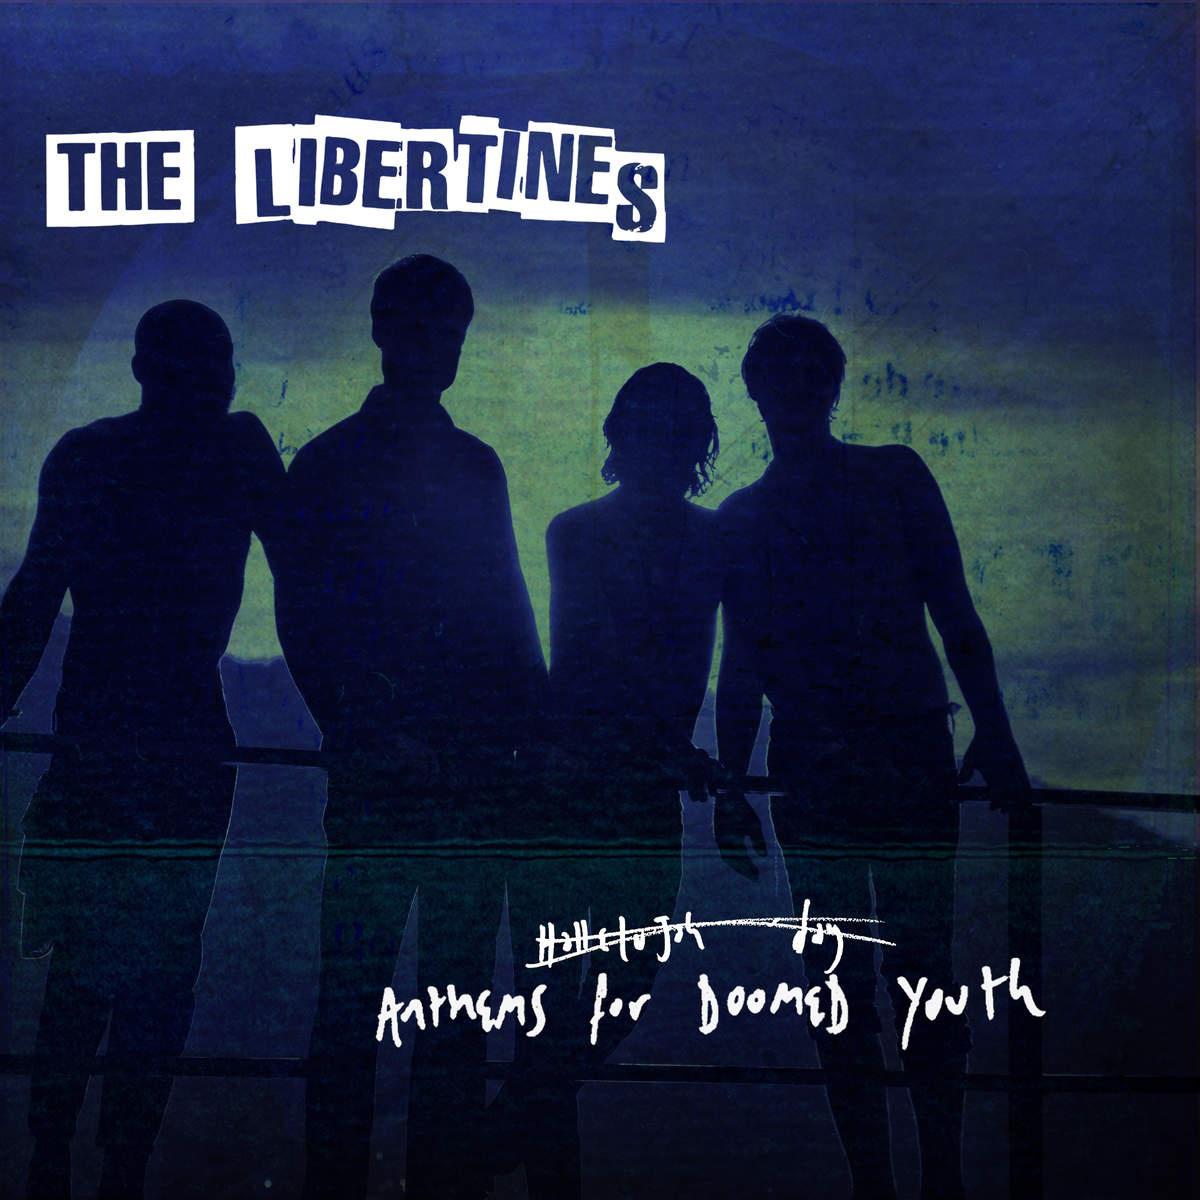 The Libertines - Dead for Love